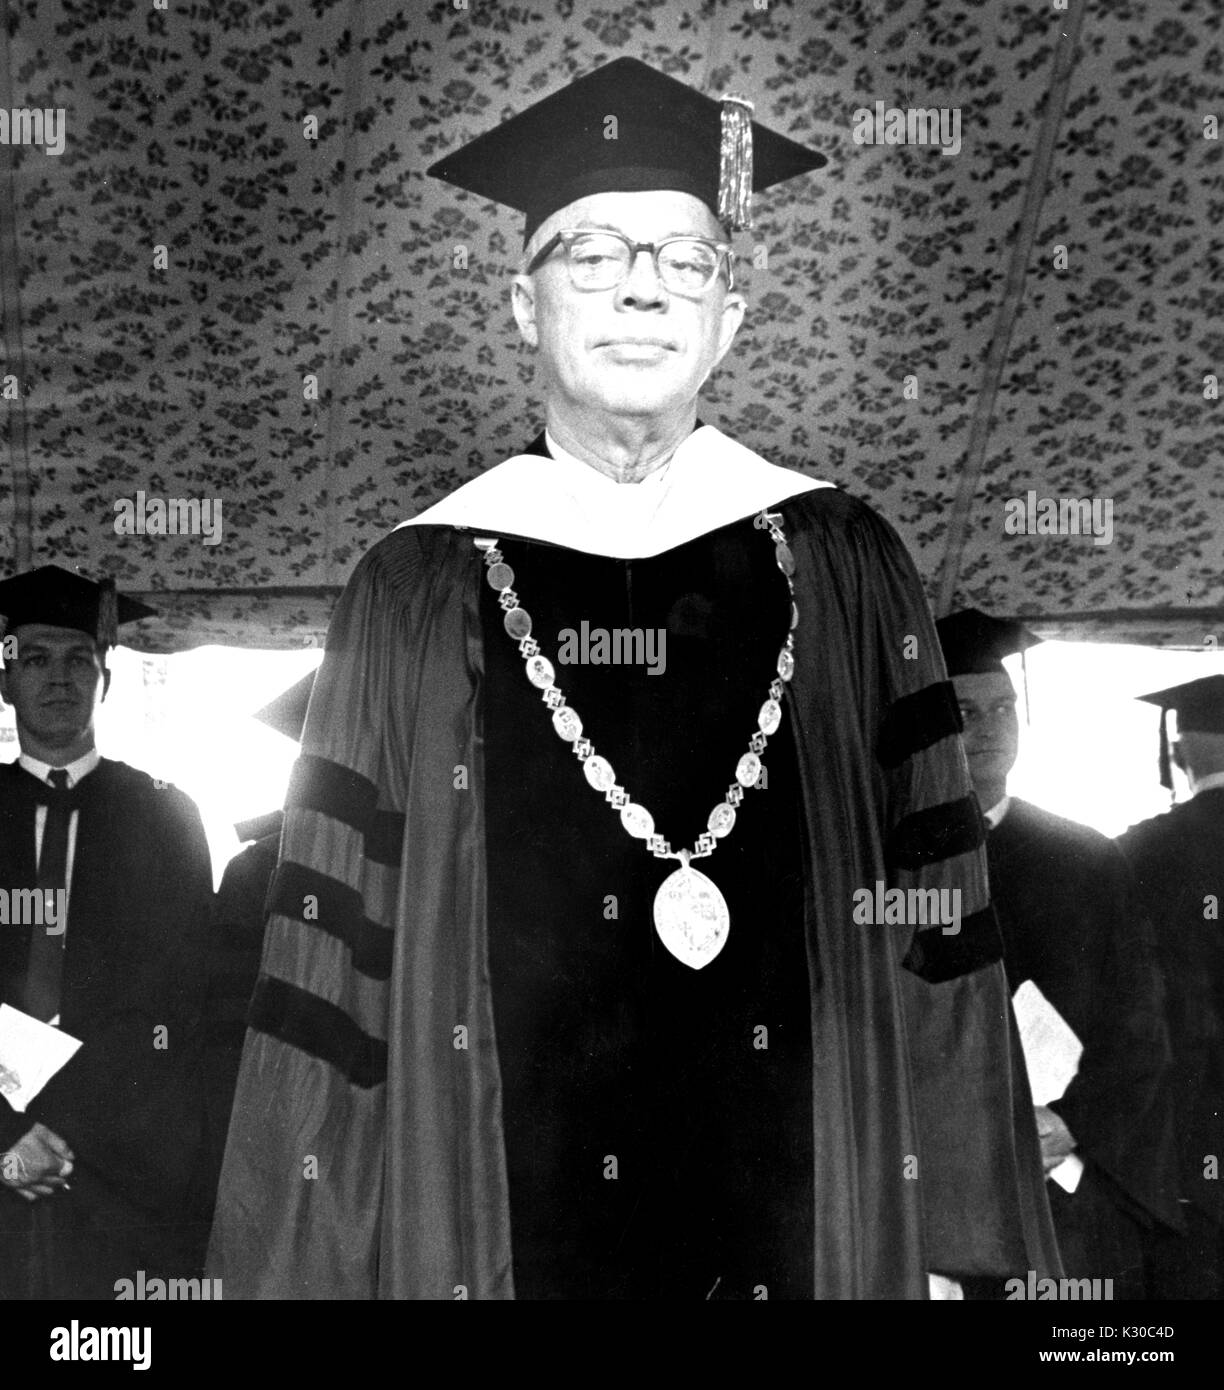 On Commencement Day, President of Johns Hopkins University Milton Stover Eisenhower stands on stage wearing graduation garb and medal, looking solemn, with graduates standing behind him with hands together, Baltimore, Maryland, June 13, 1967. Stock Photo